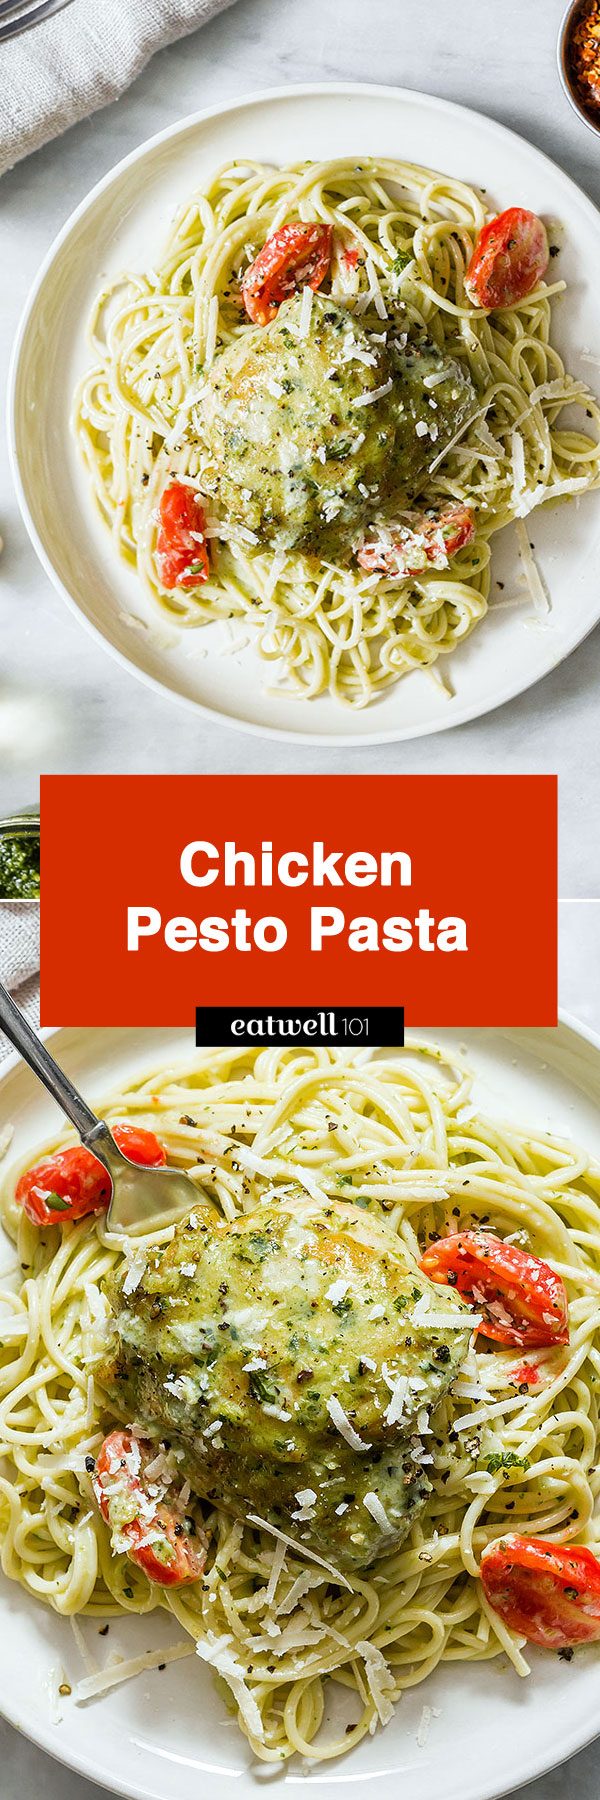 Chicken Pesto Pasta – DELICIOUS and ready in 25 minutes from start to finish!